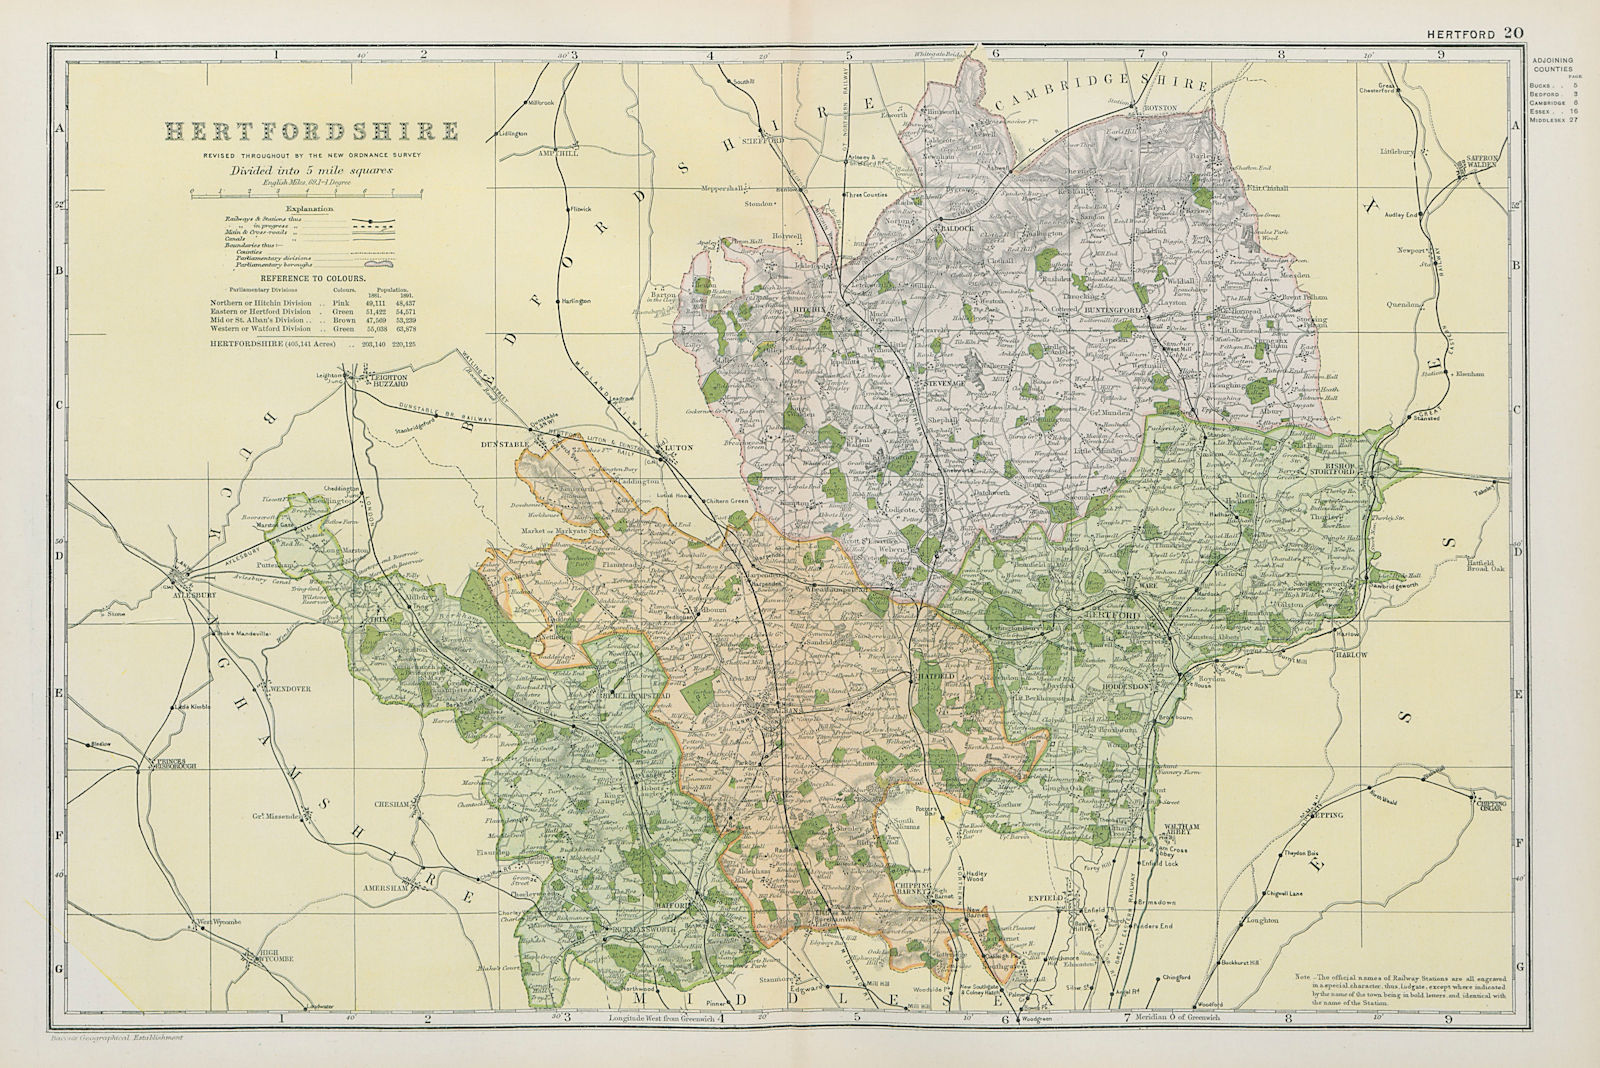 HERTFORDSHIRE. Showing Parliamentary divisions, boroughs & parks. BACON 1900 map